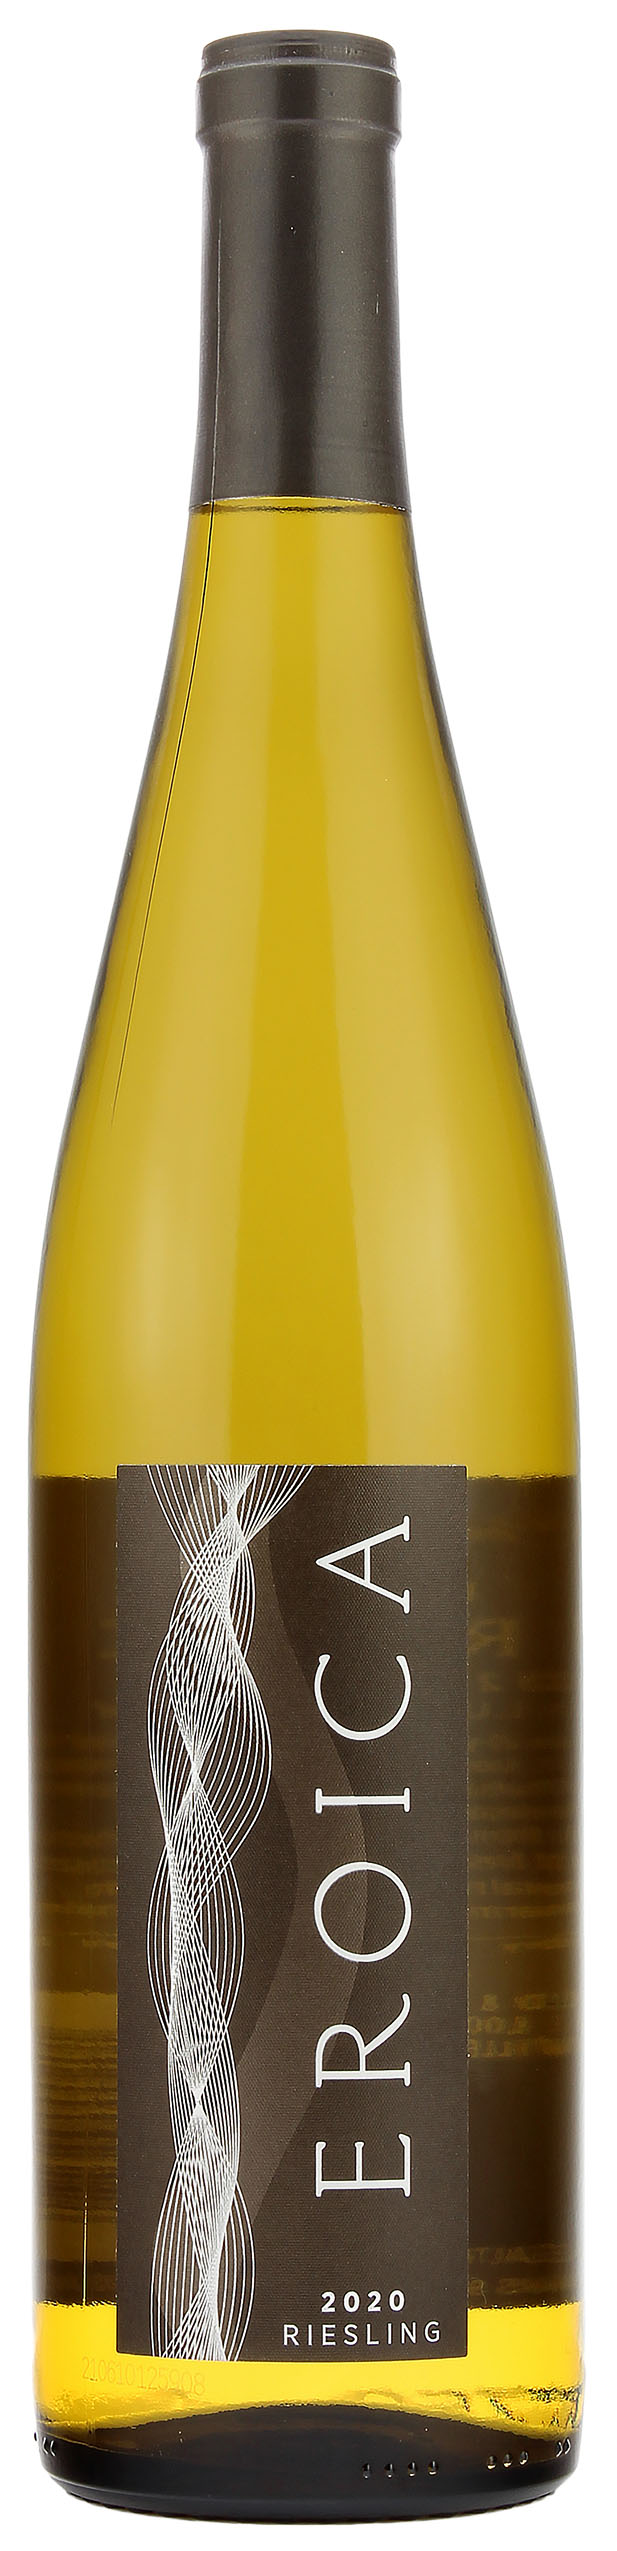 Eroica Riesling 2020 12.0% 0,75l